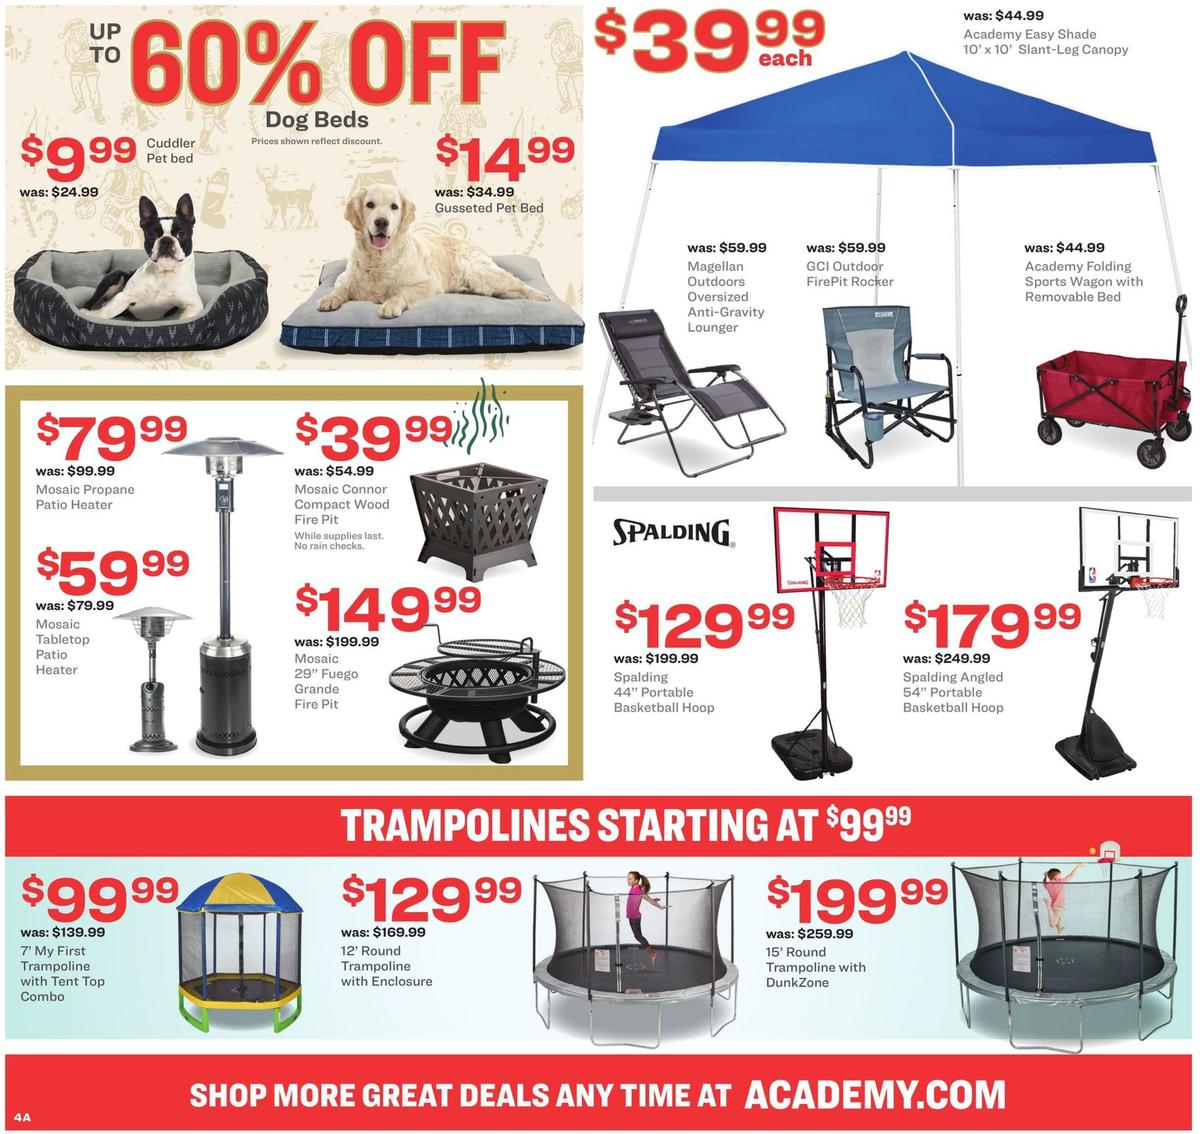 Academy Sports + Outdoors Weekly Ad from November 24